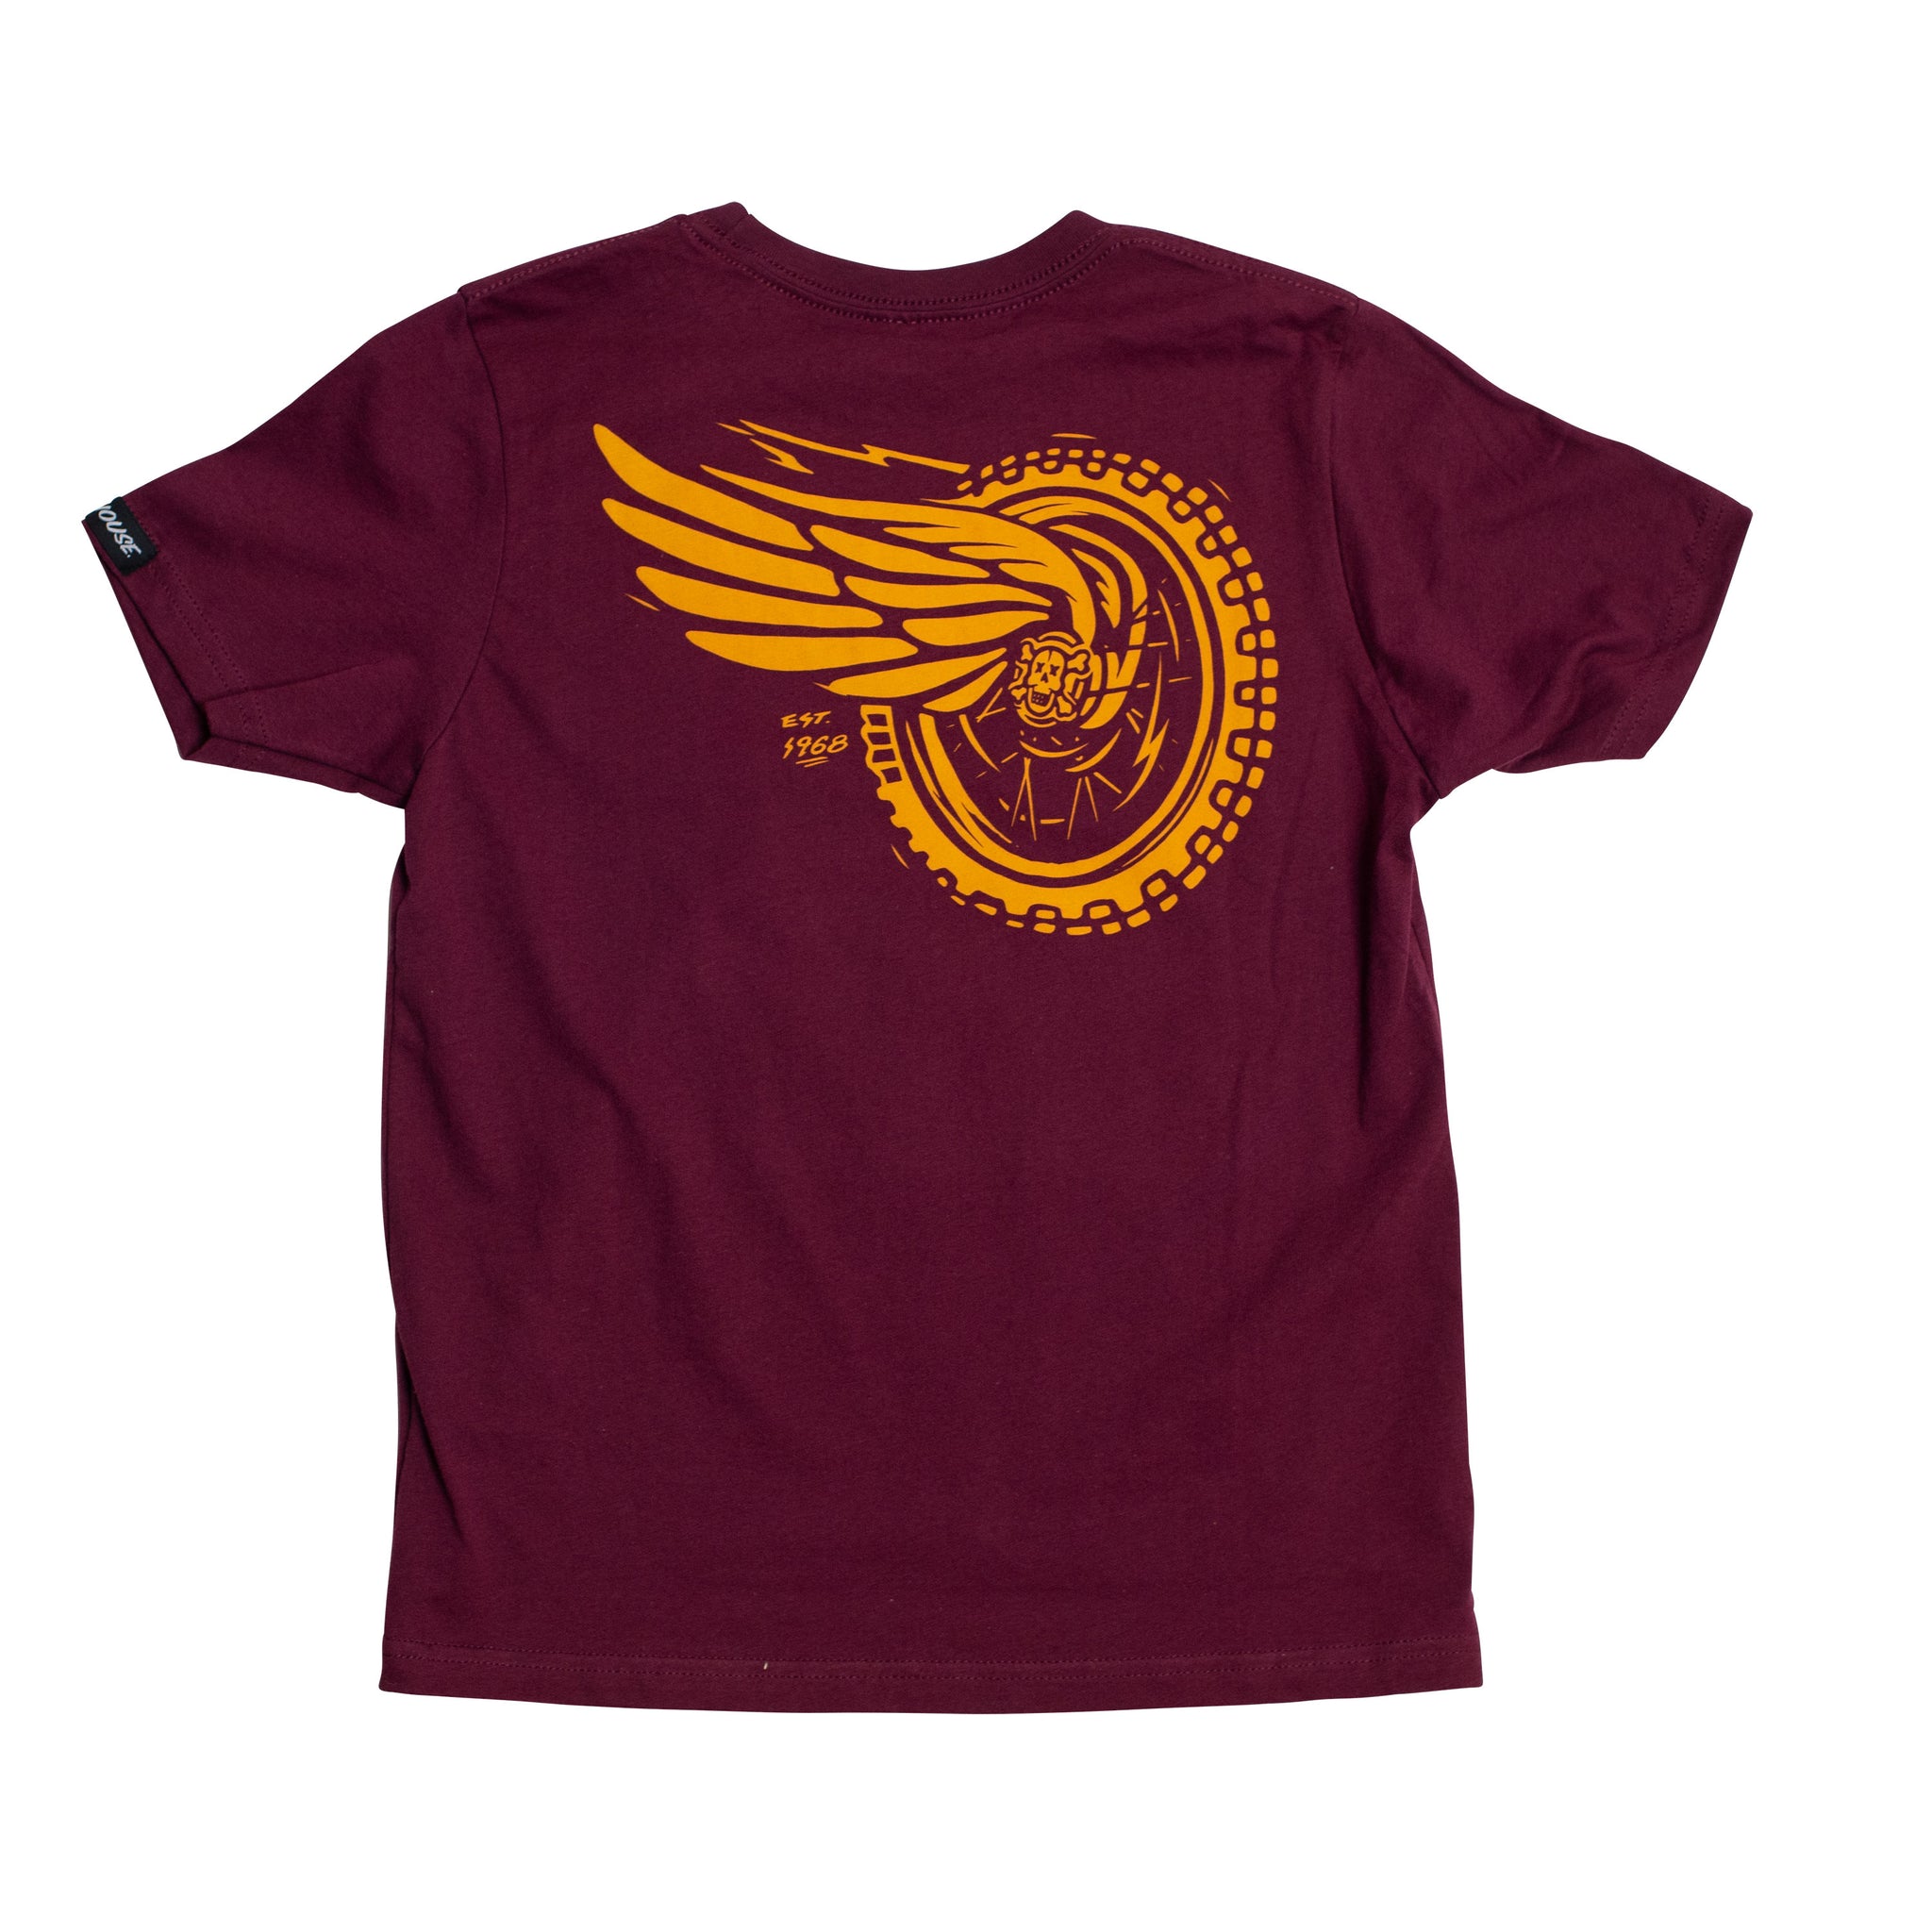 Fasthouse Endo Youth Tee - Maroon